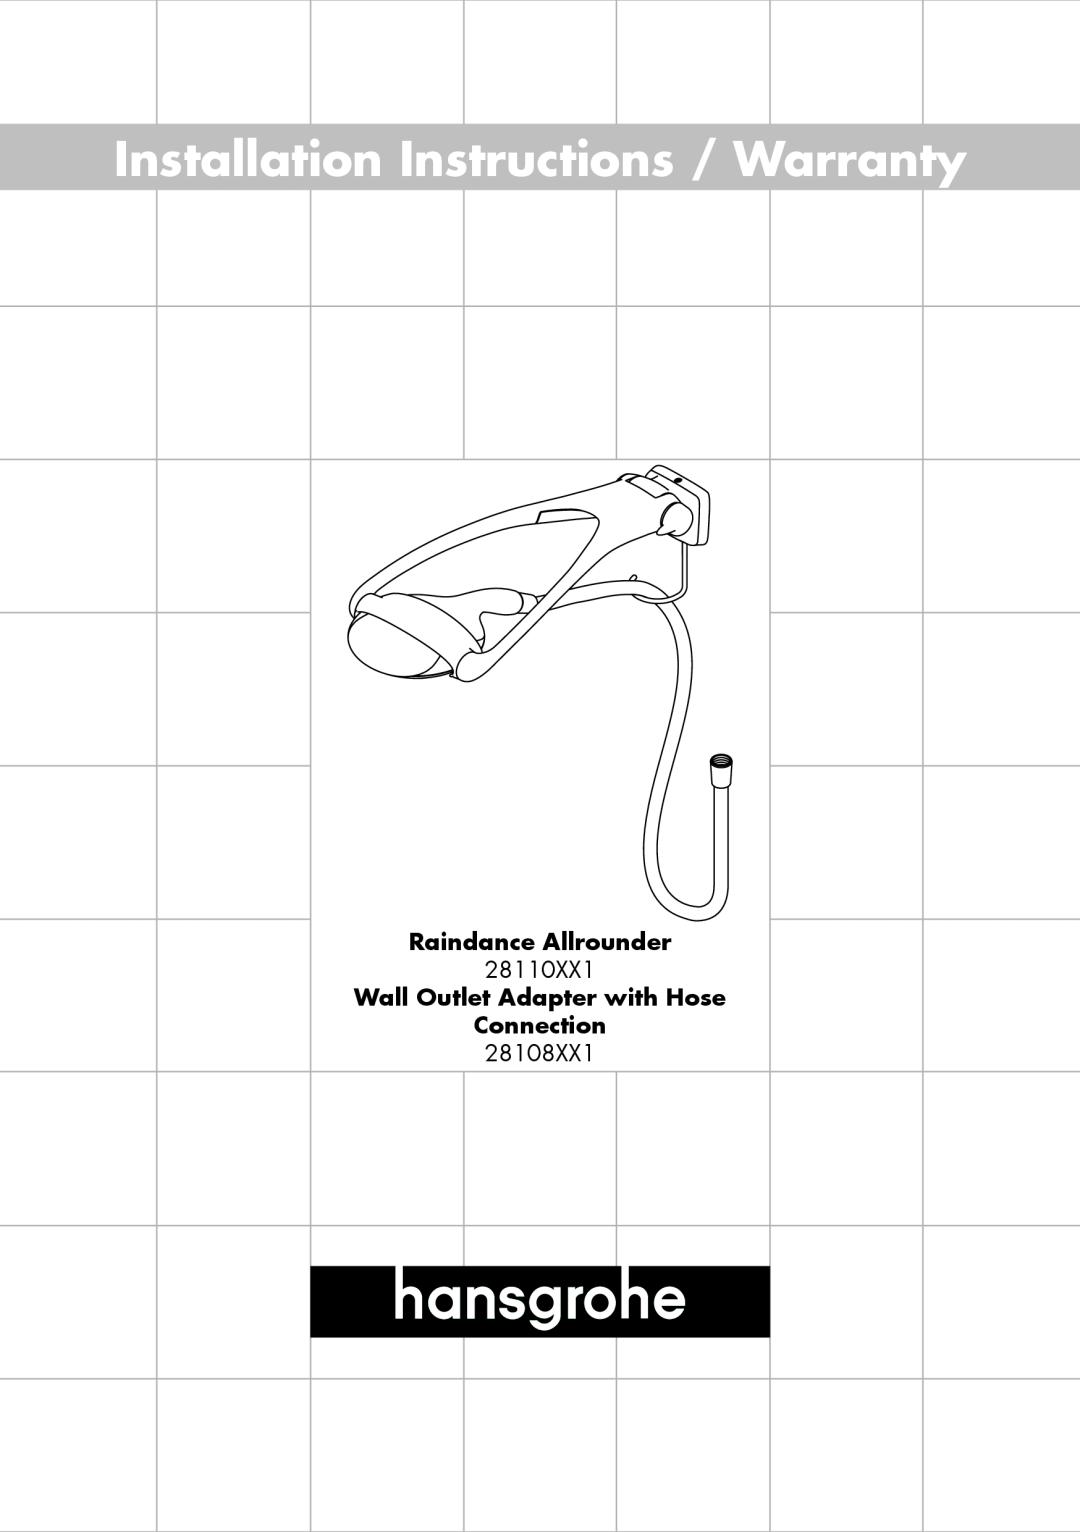 Hans Grohe 2810BXX1, 28110XX1 installation instructions Raindance Allrounder, Wall Outlet Adapter with Hose Connection 